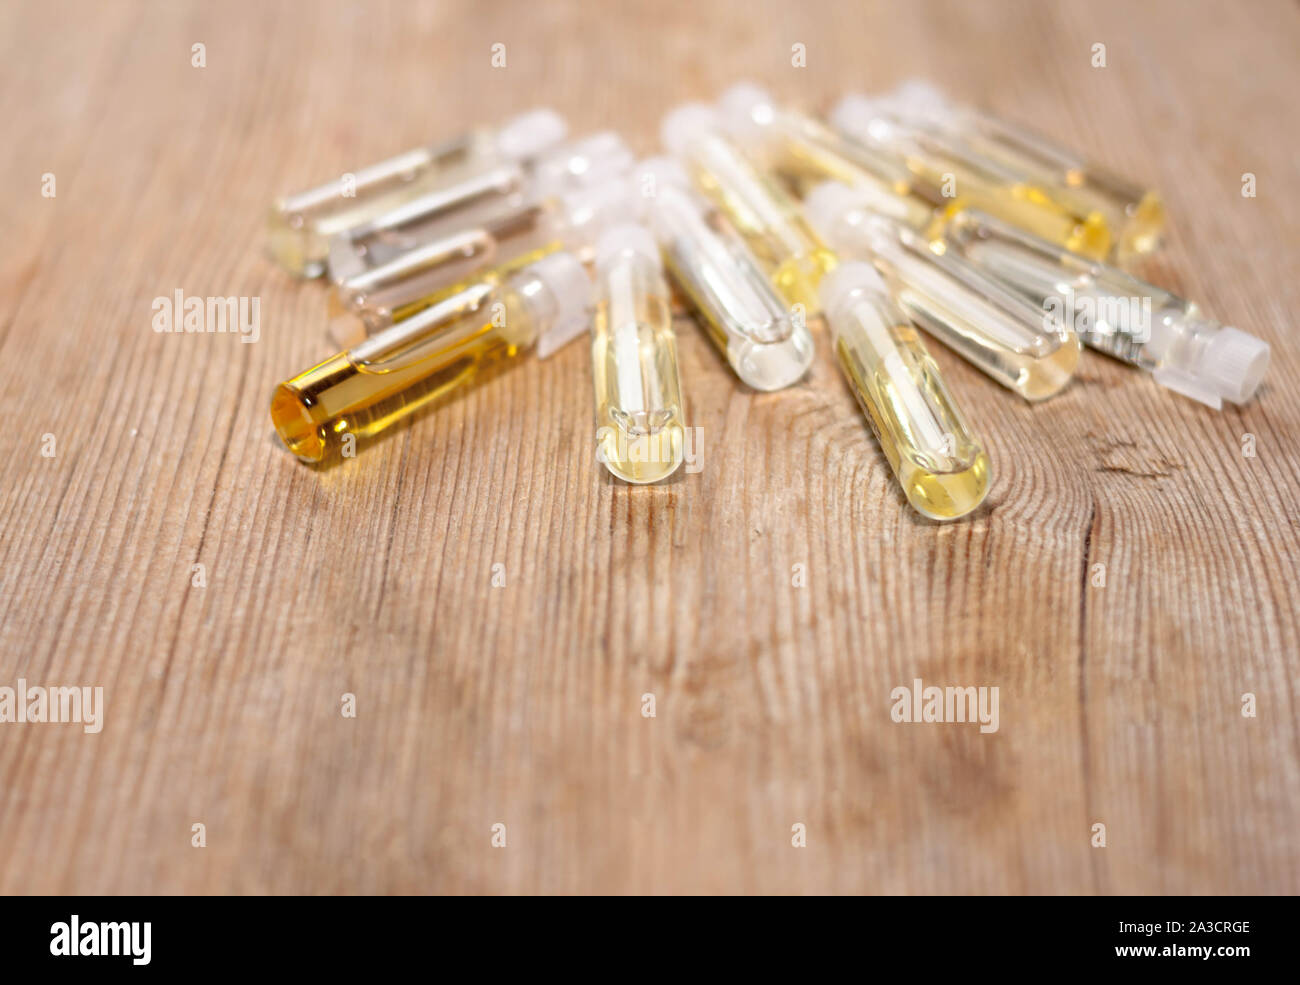 Group of small glass bottles on wooden background. Perfume testers or chemical samples. Side view. Selective soft focus. Shallow depth of field. Text Stock Photo